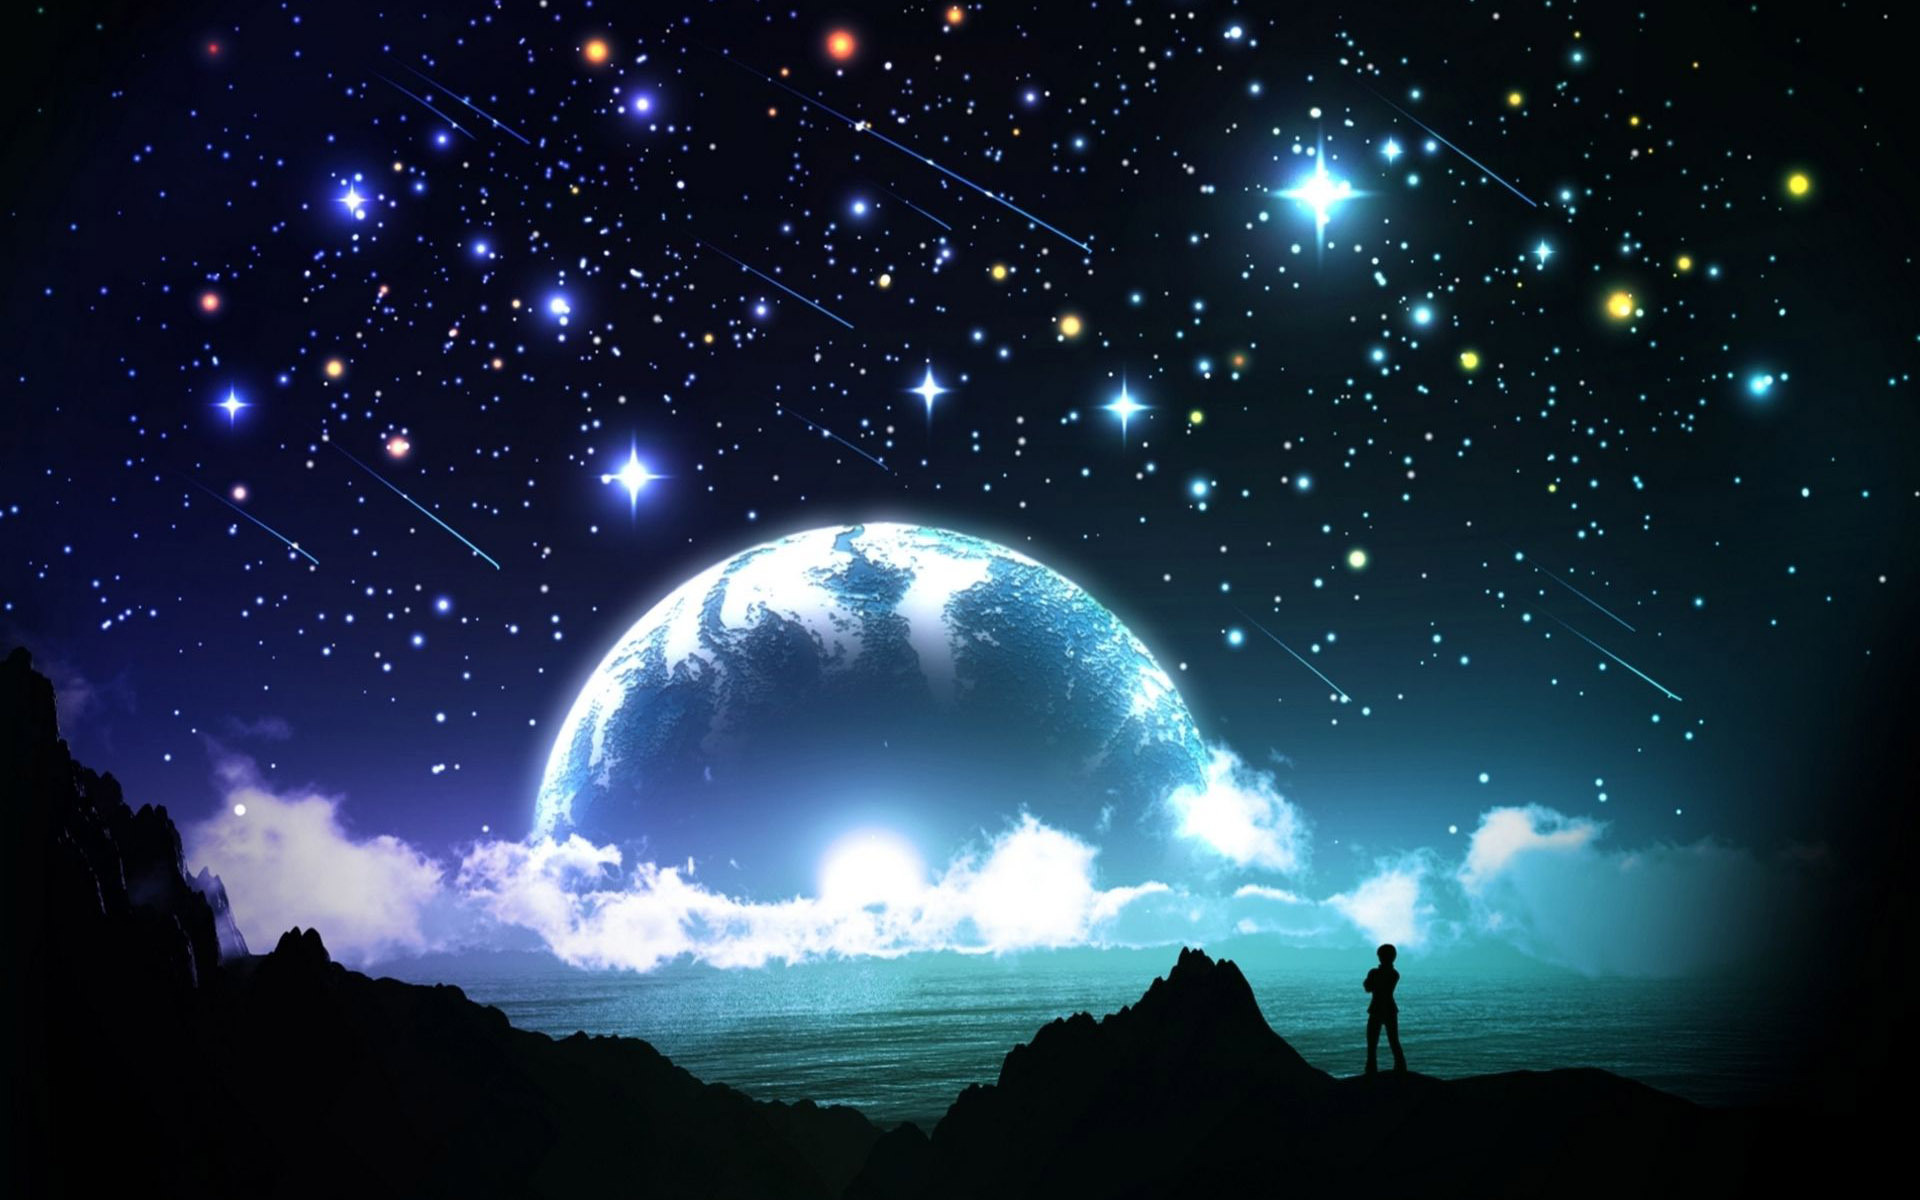 Top 10 Beautiful Night Live Wallpaper Apps For Android - Night Sky Stars  Moon - 1920x1200 Wallpaper 